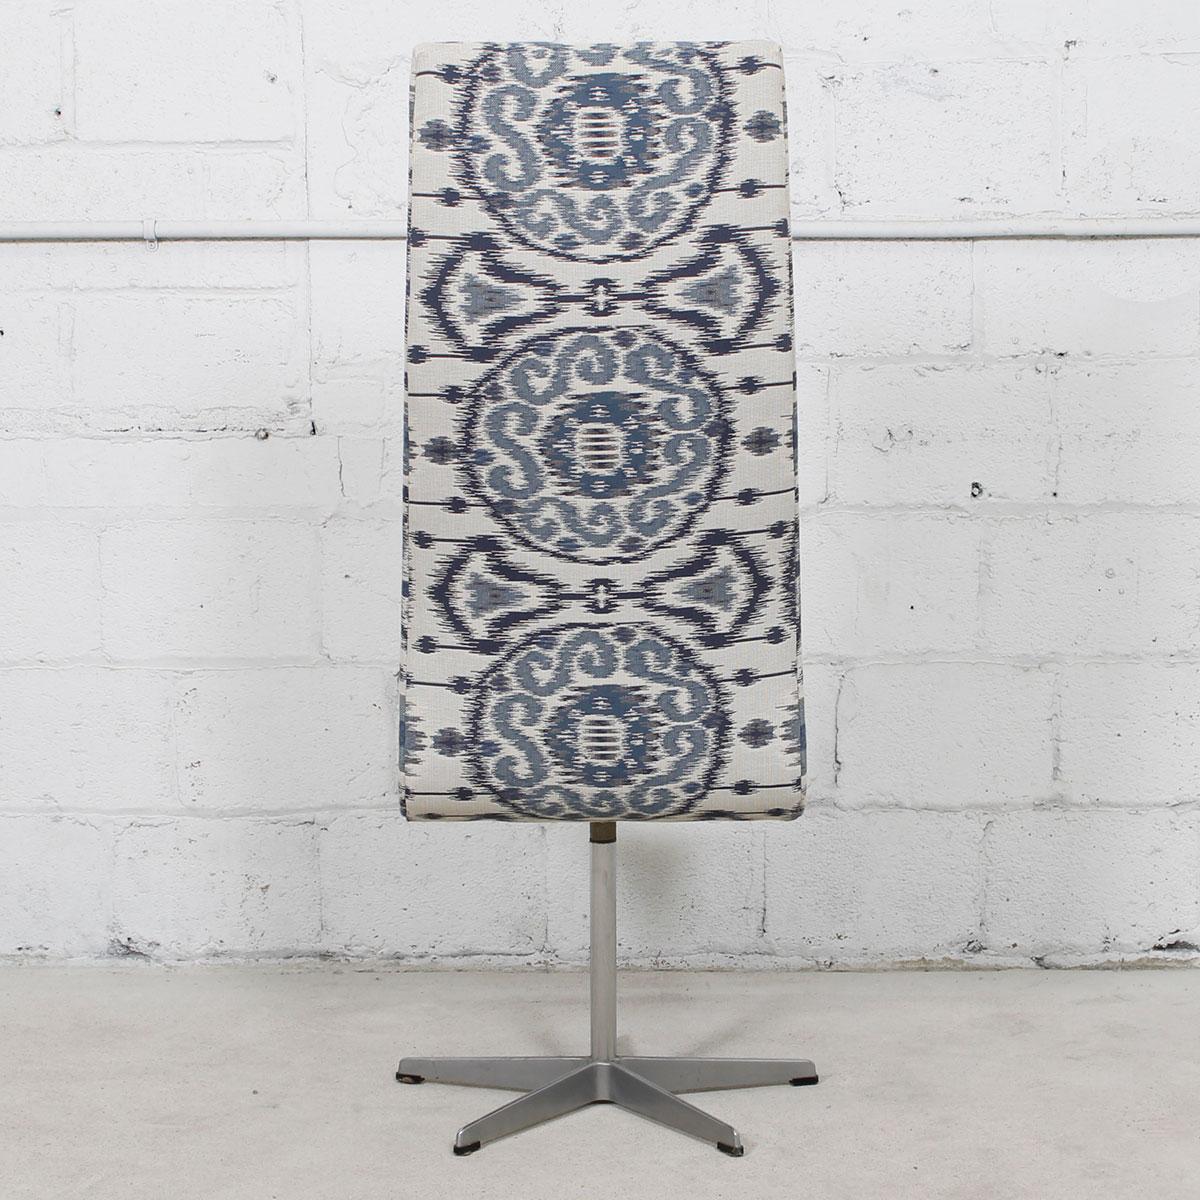 Set of 6 Vintage Fritz Hansen Oxford Chairs in New Blue & White Ikat Upholstery For Sale 2